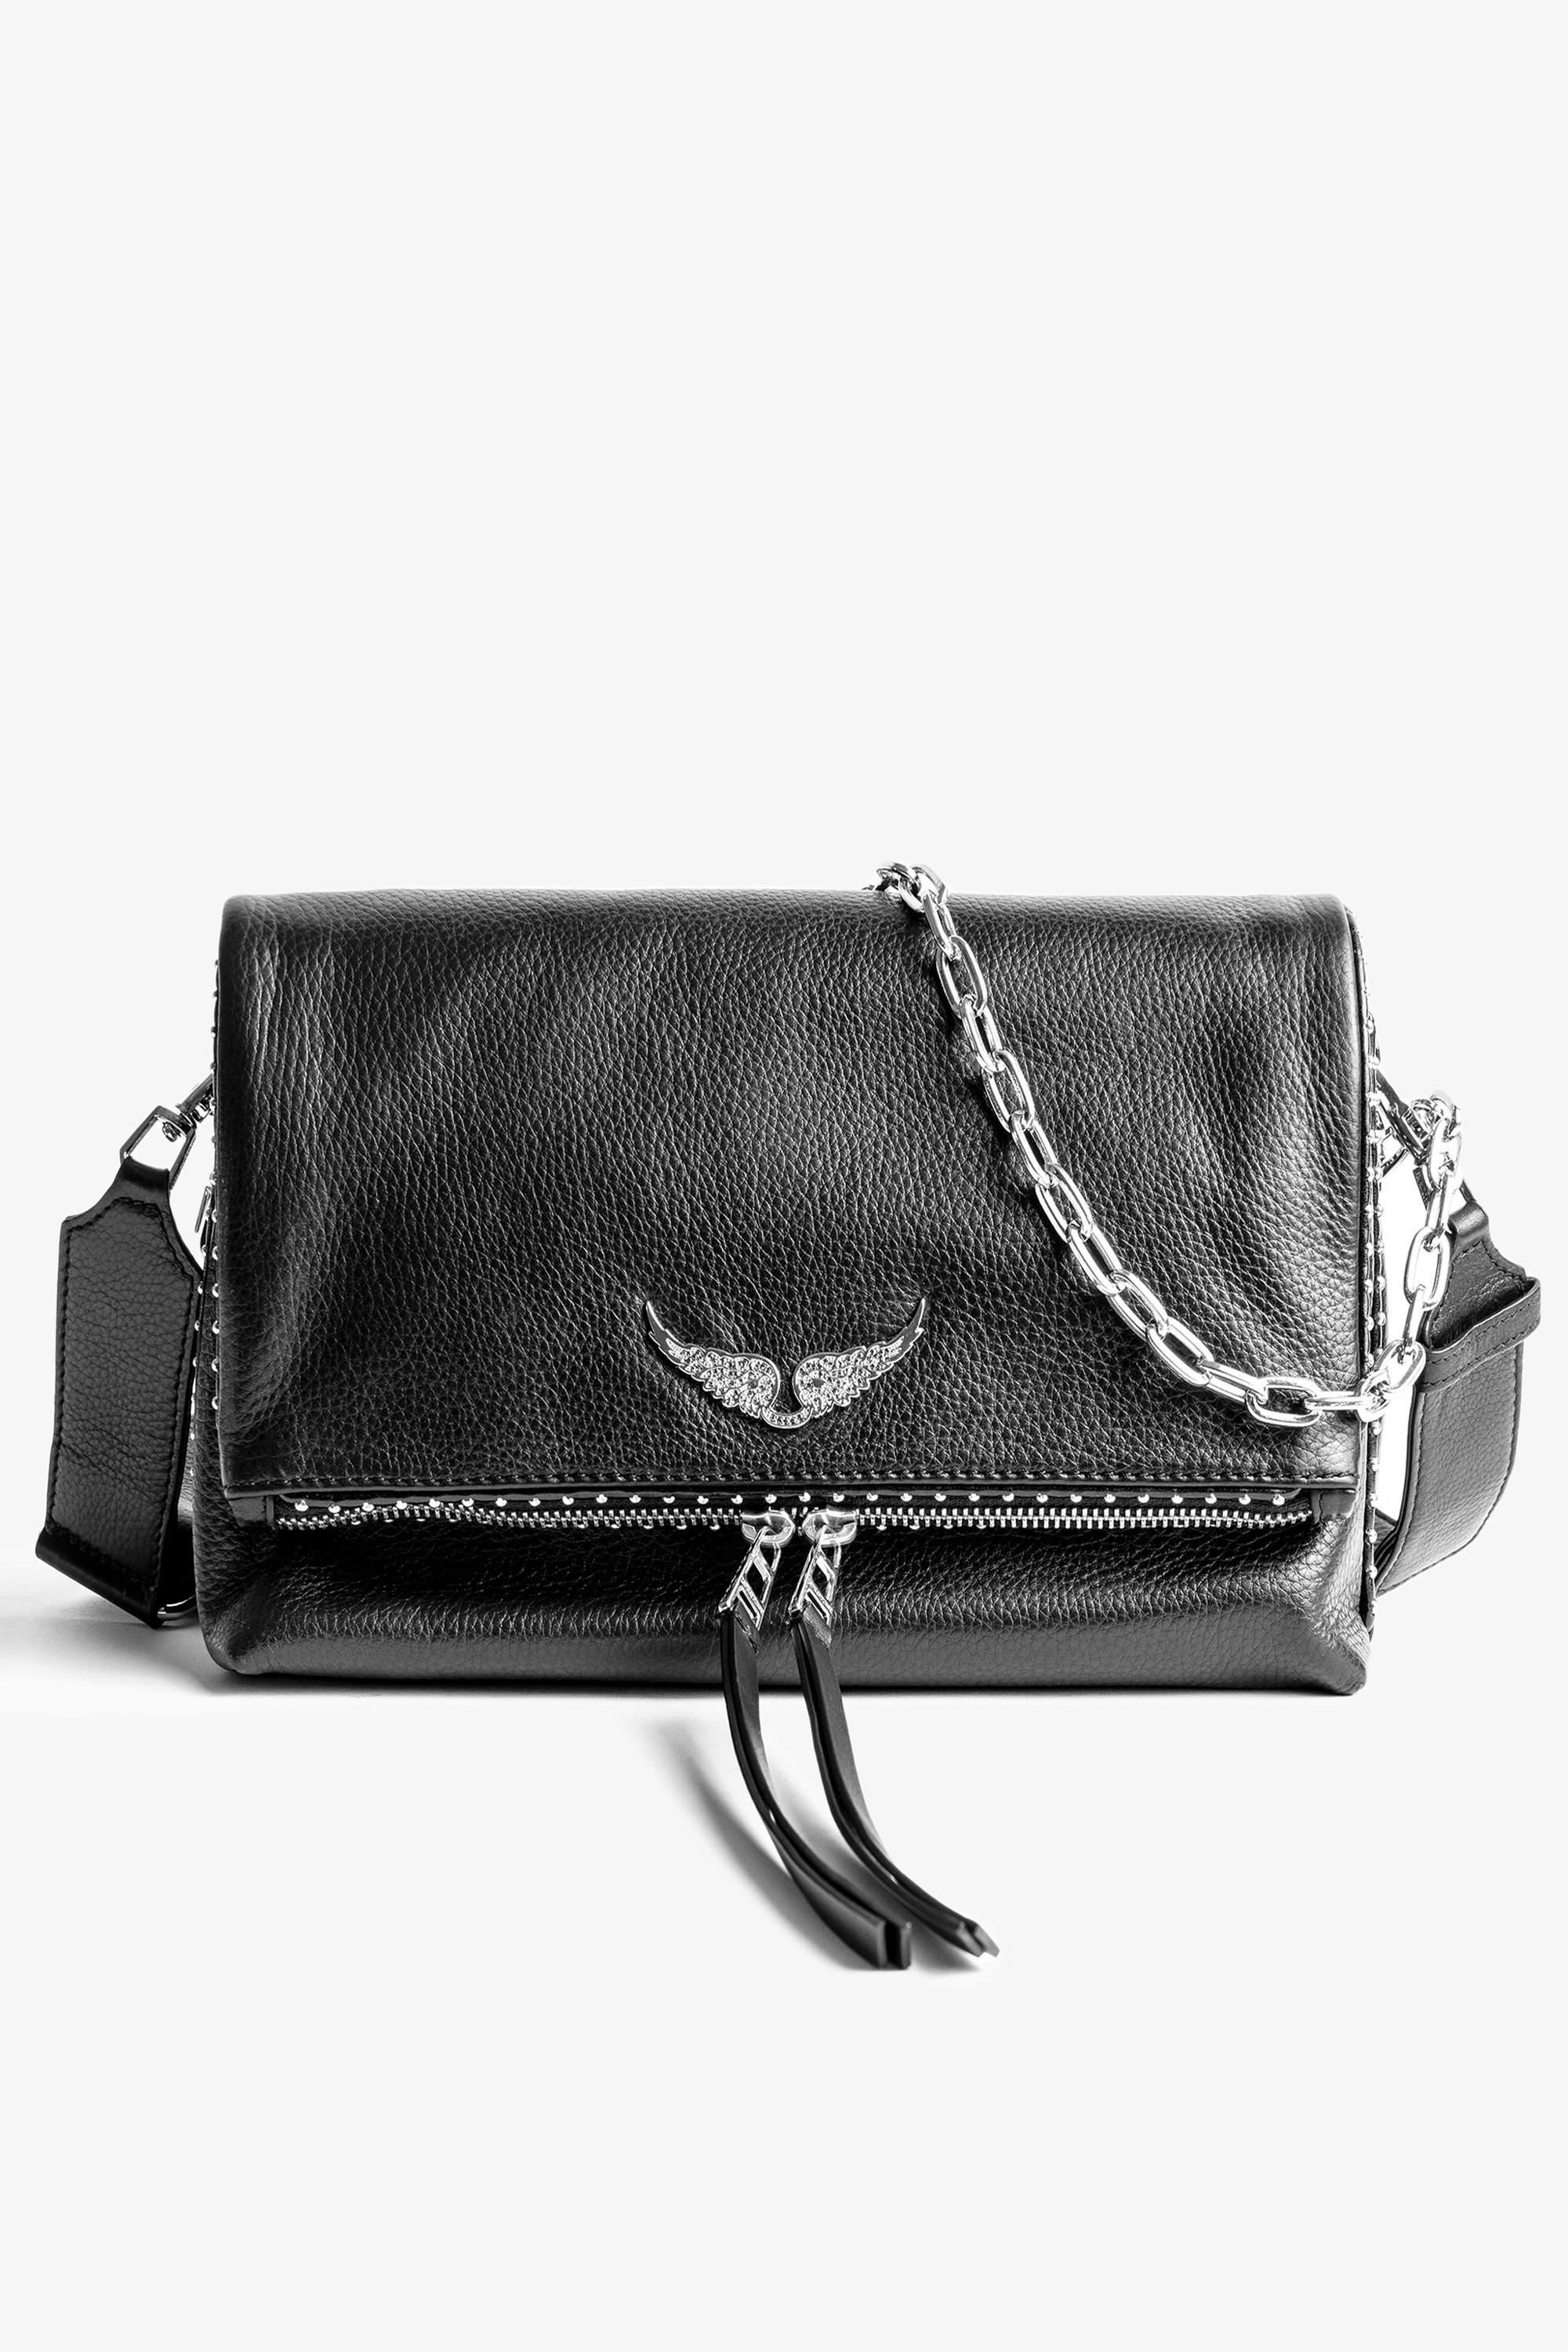 Rocky Studs Bag Women’s black leather bag embellished with studs.